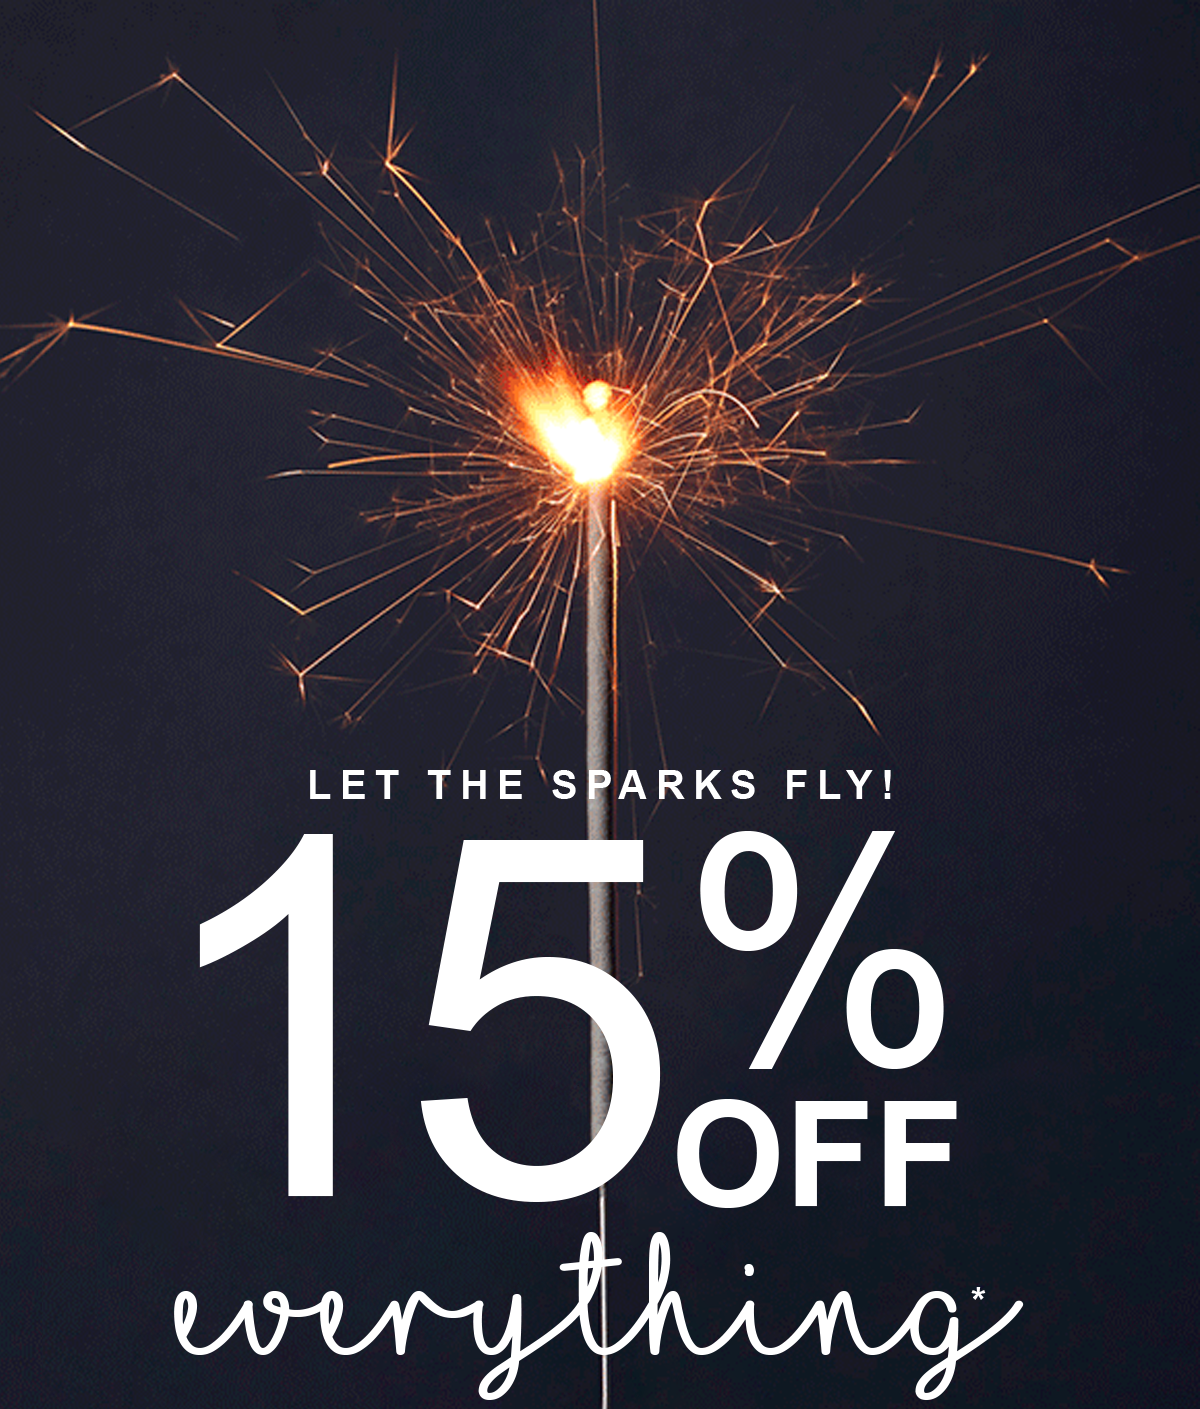 Let the sparks fly! 15% off everything